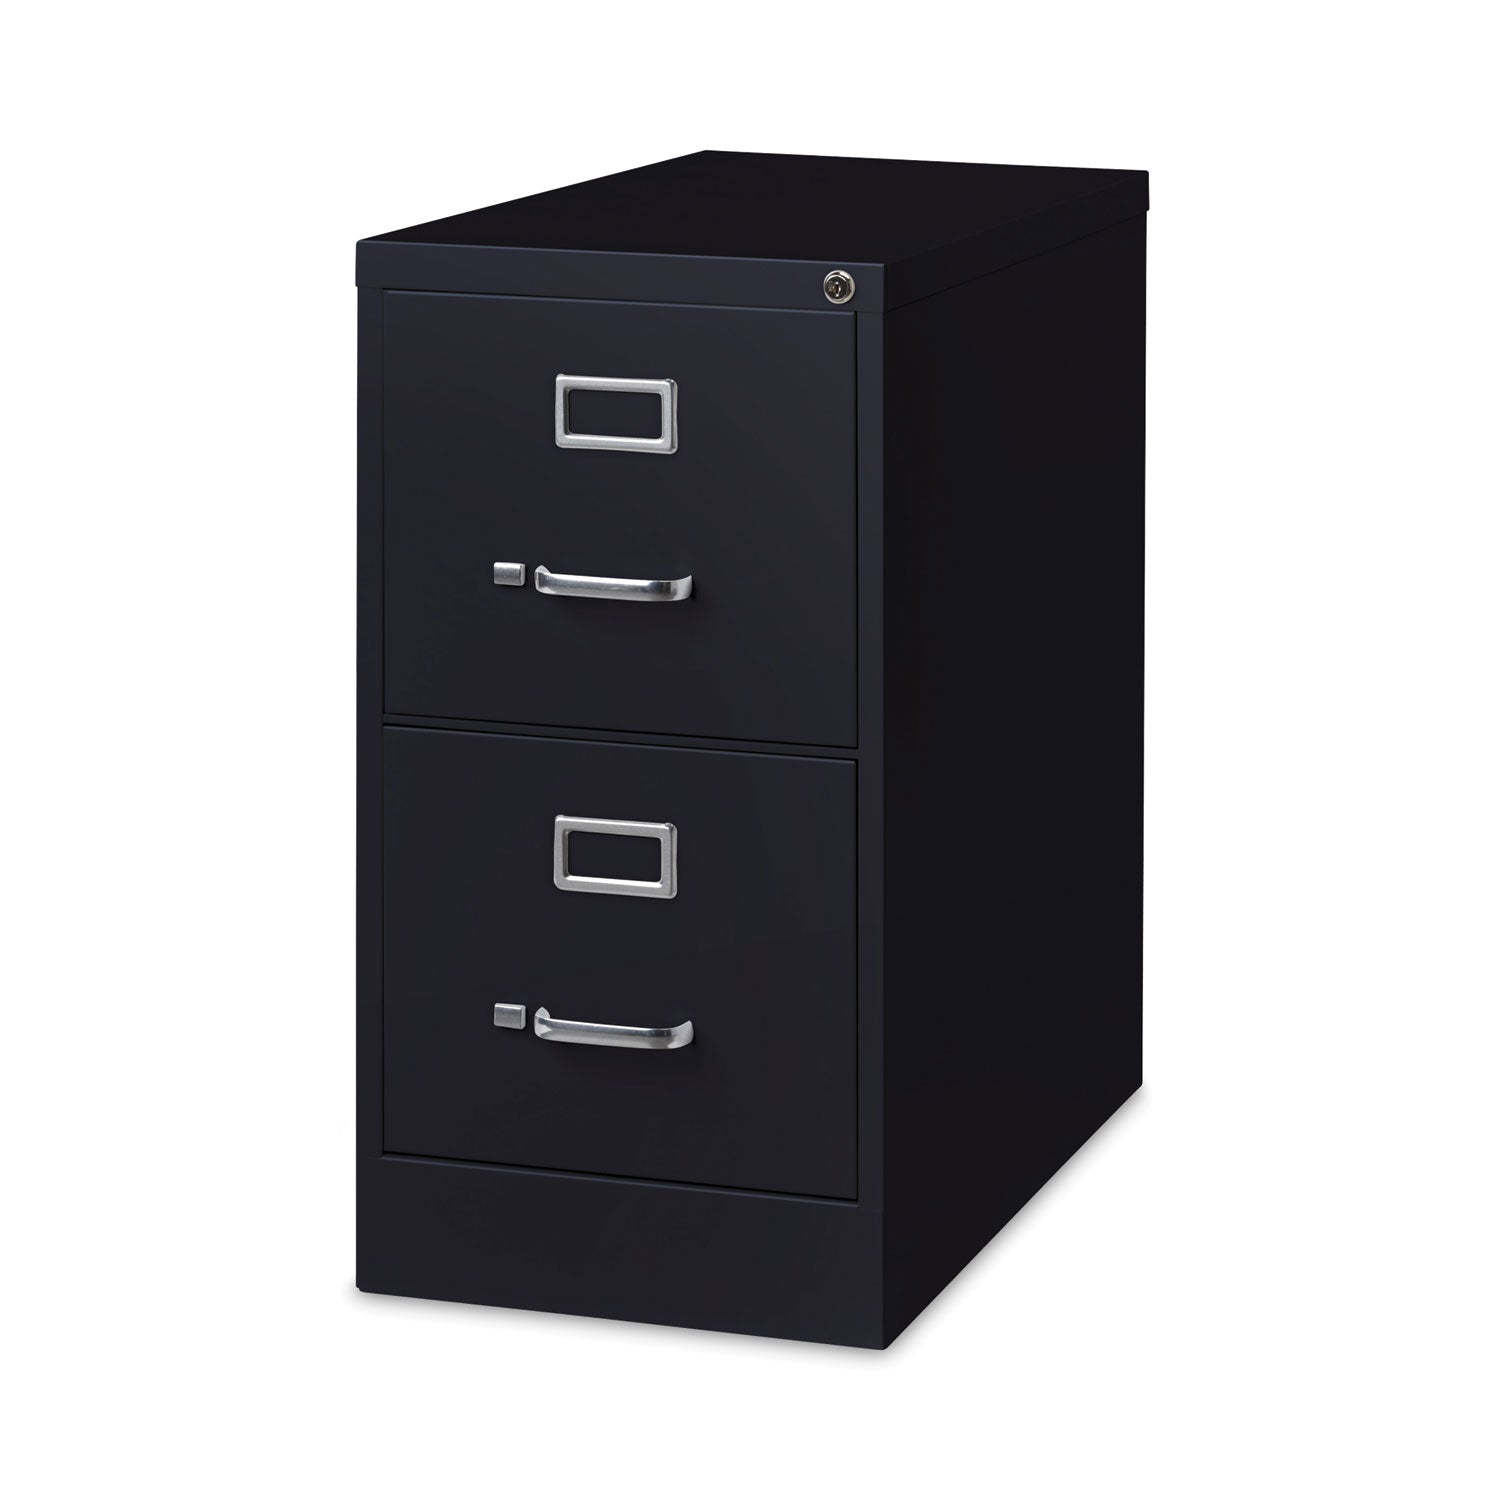 vertical-letter-file-cabinet-2-letter-size-file-drawers-black-15-x-265-x-2837_hid14101 - 4